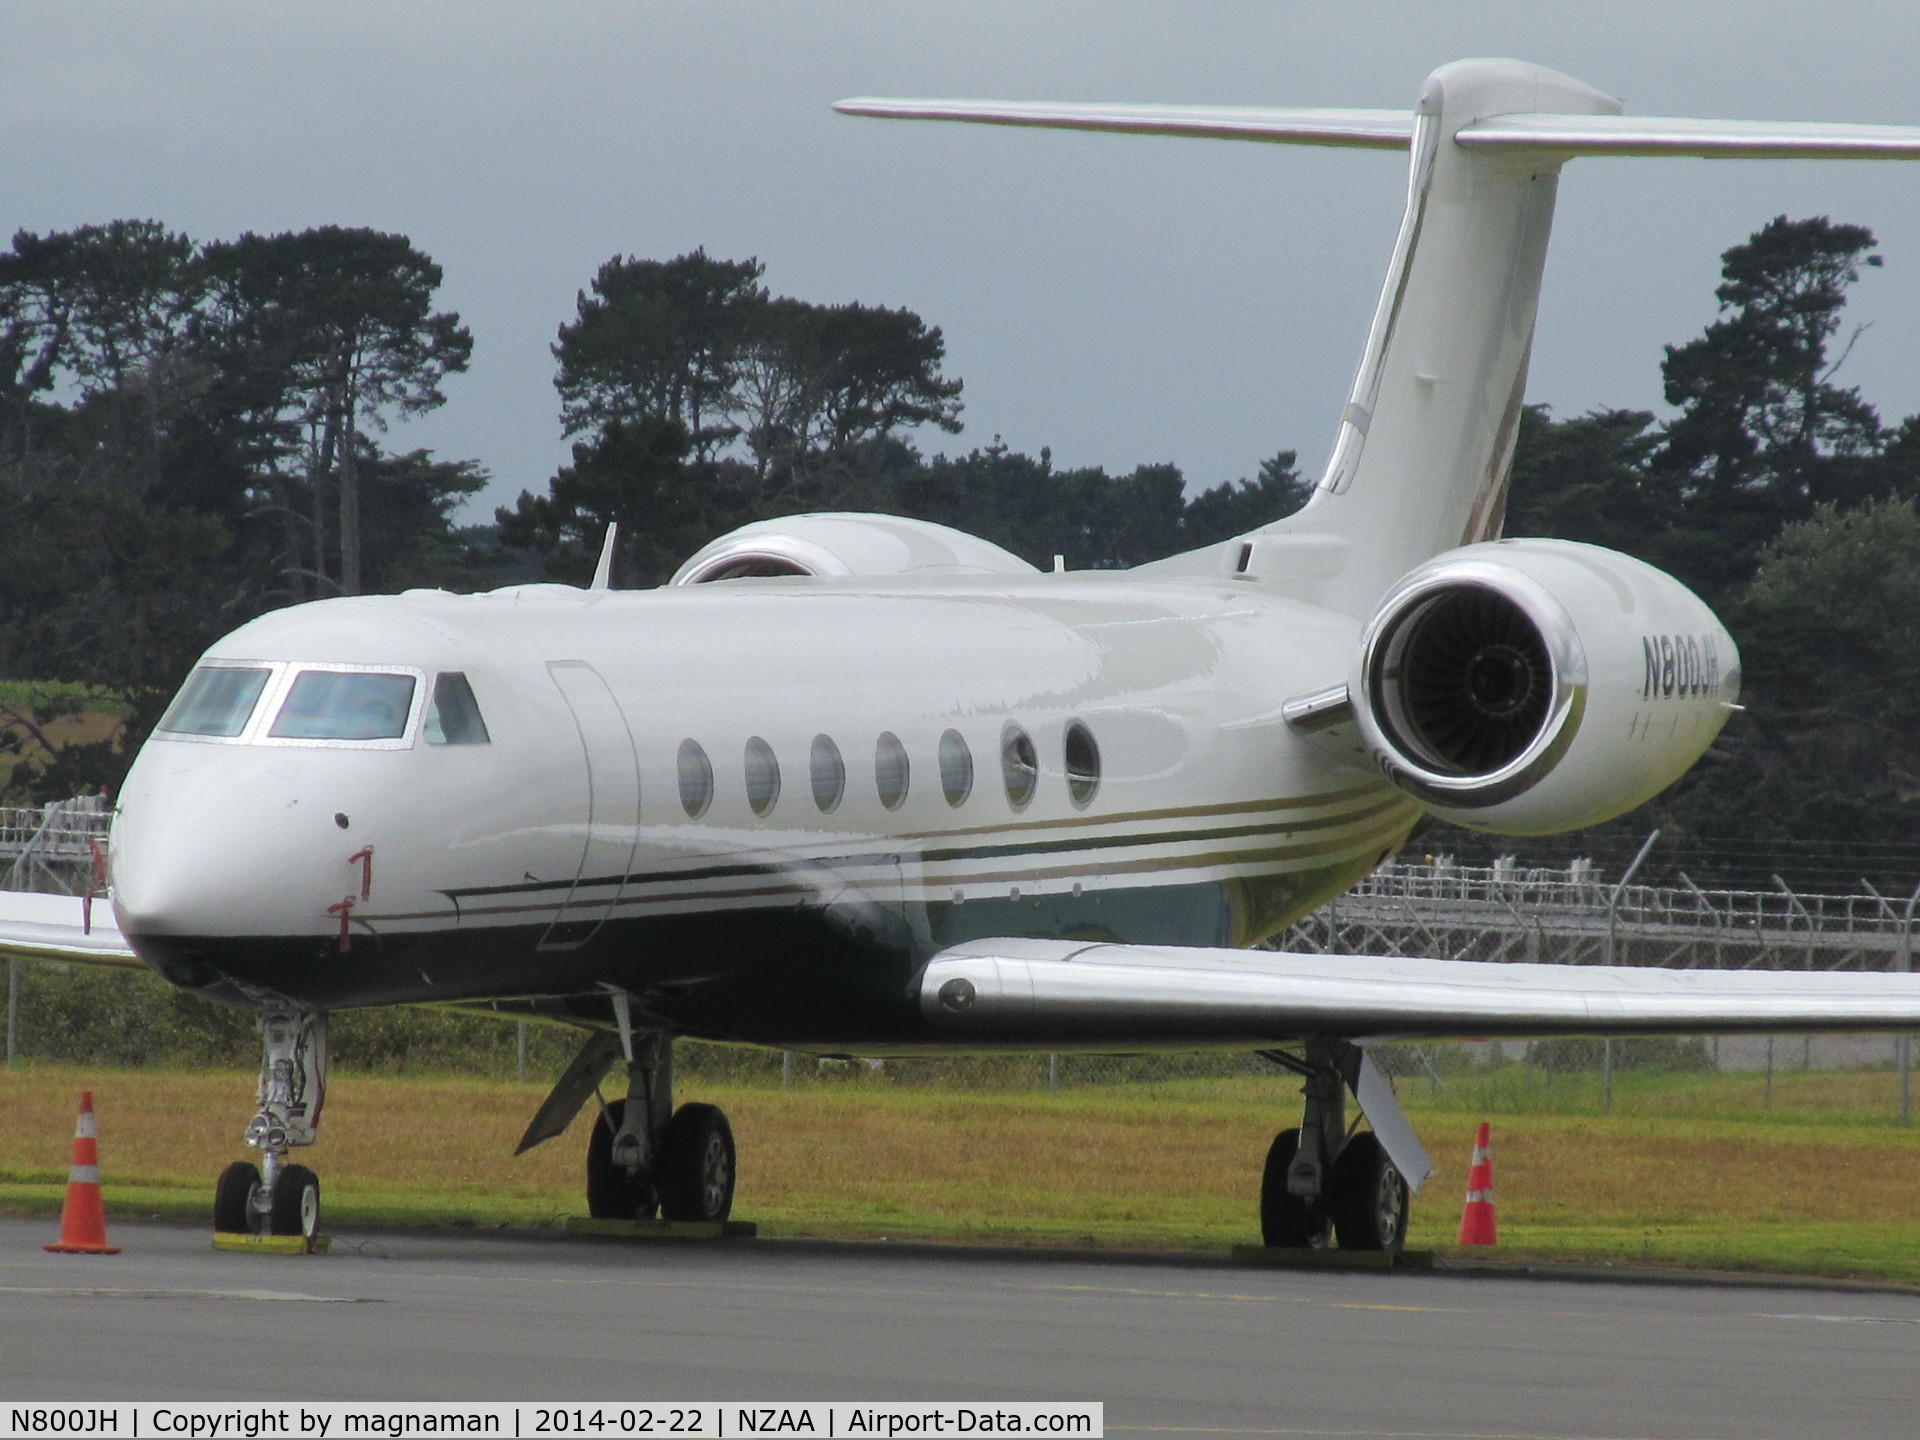 N800JH, 2005 Gulfstream Aerospace GV-SP (G550) C/N 5073, At AKL today - not sure when arrived